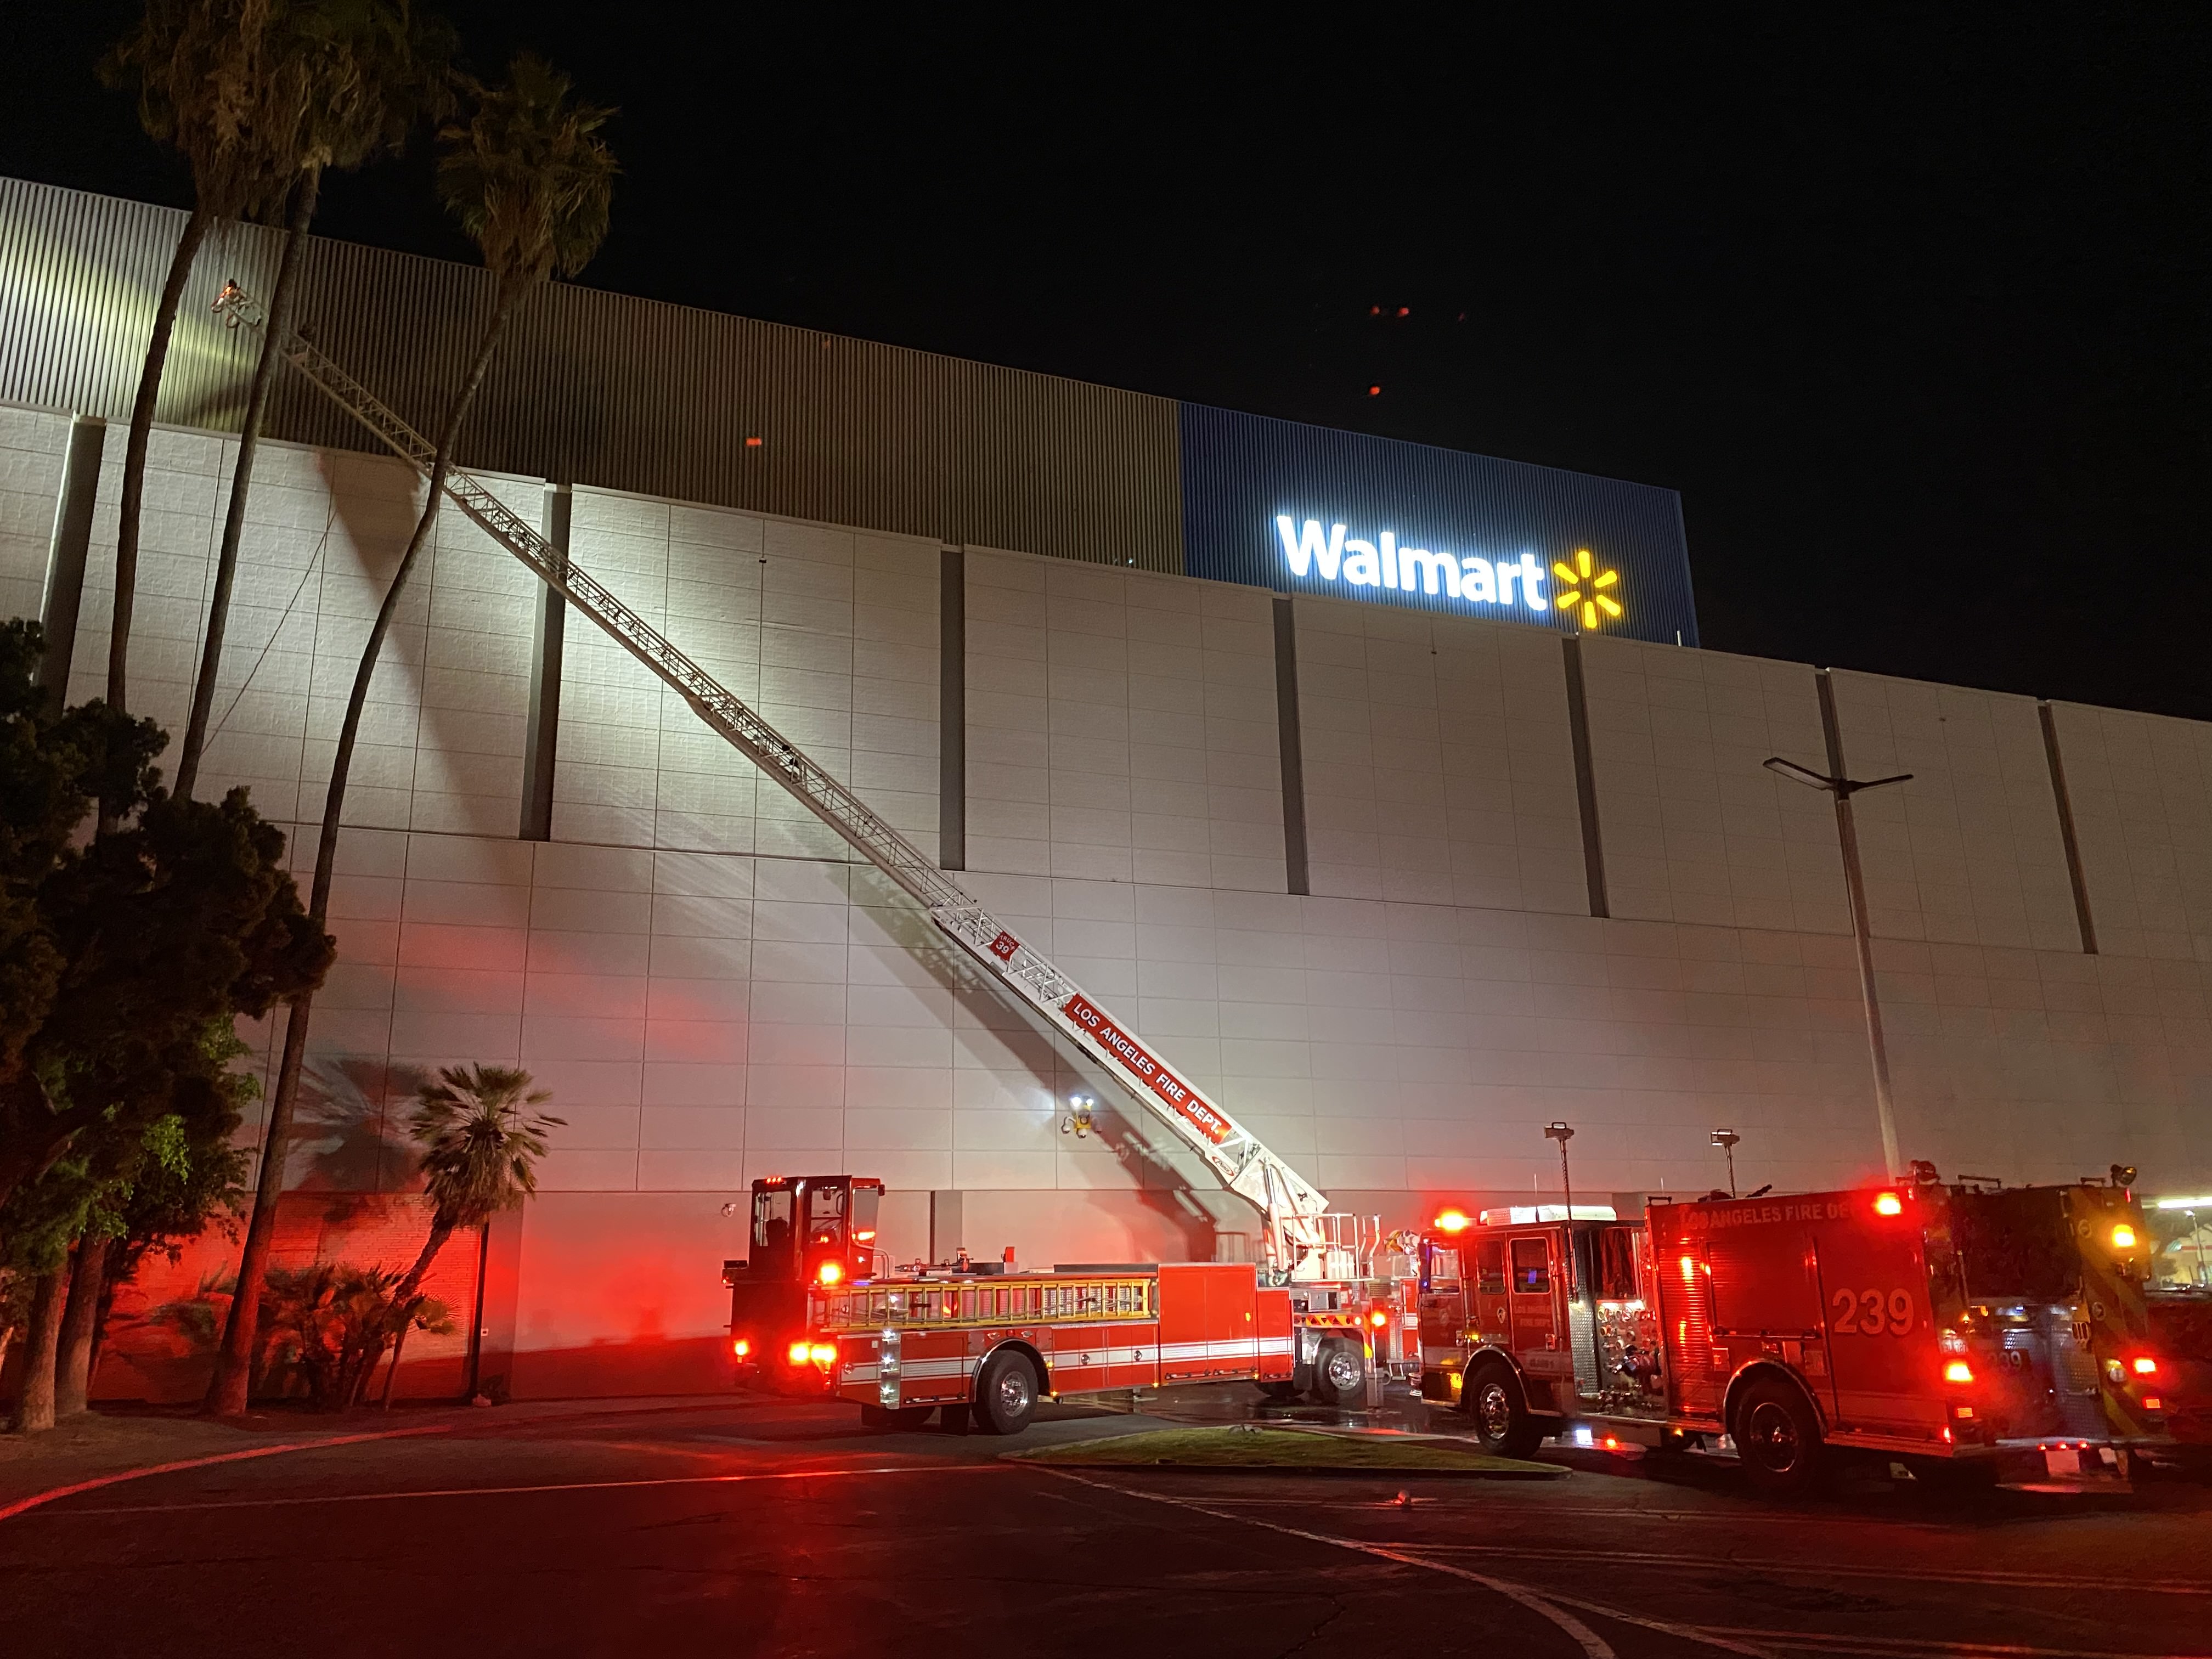 Fire truck with aerial ladder extended to roof of Walmart